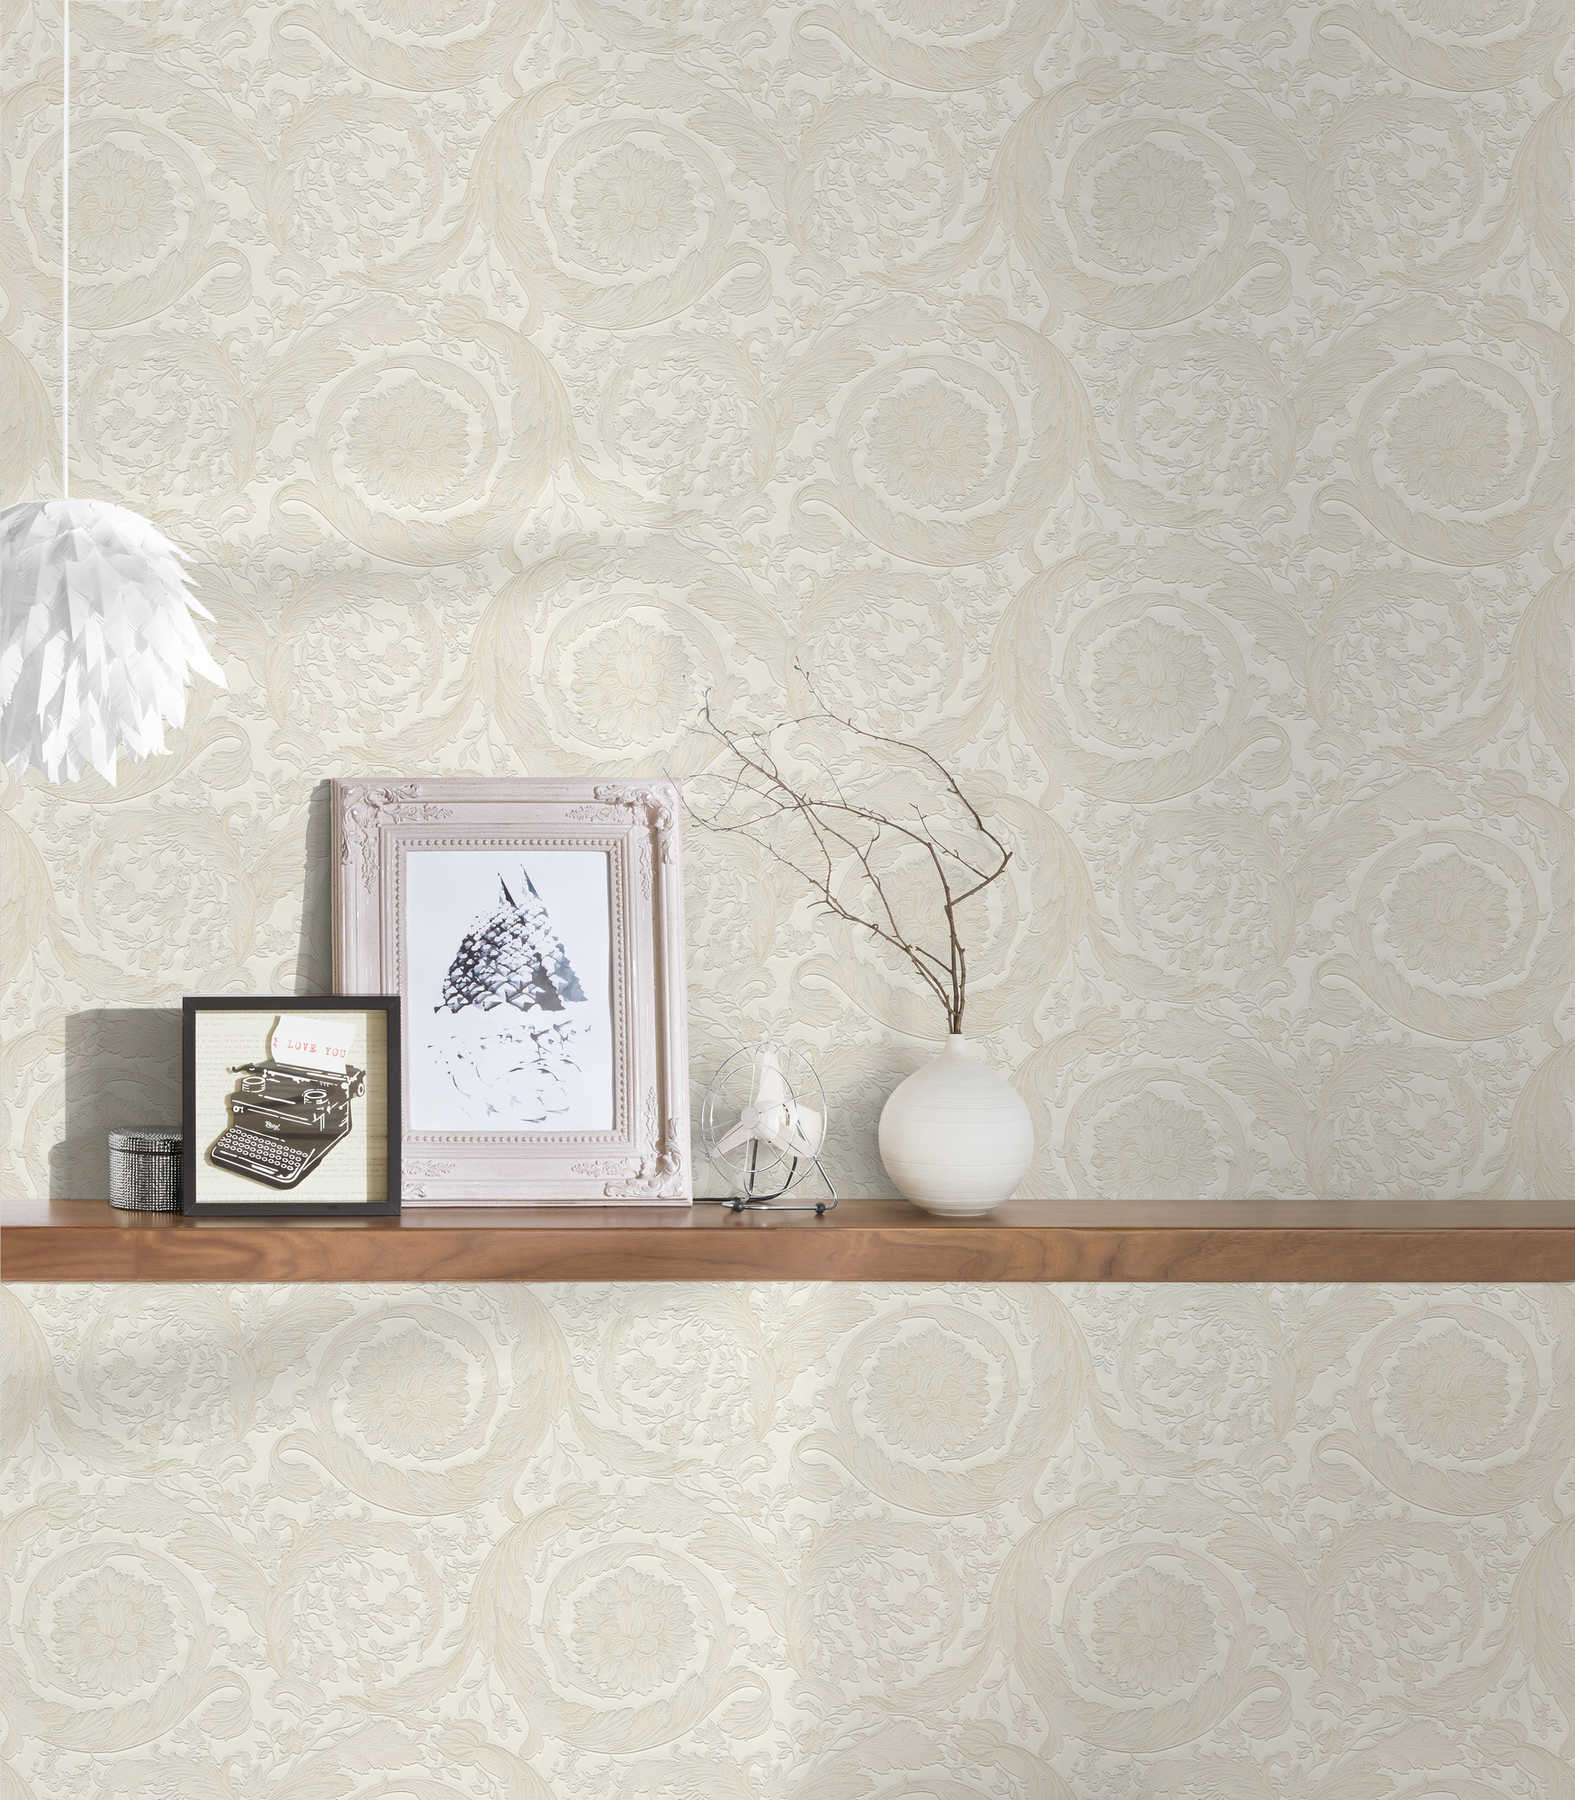             VERSACE wallpaper with ornaments in baroque style - cream, silver
        